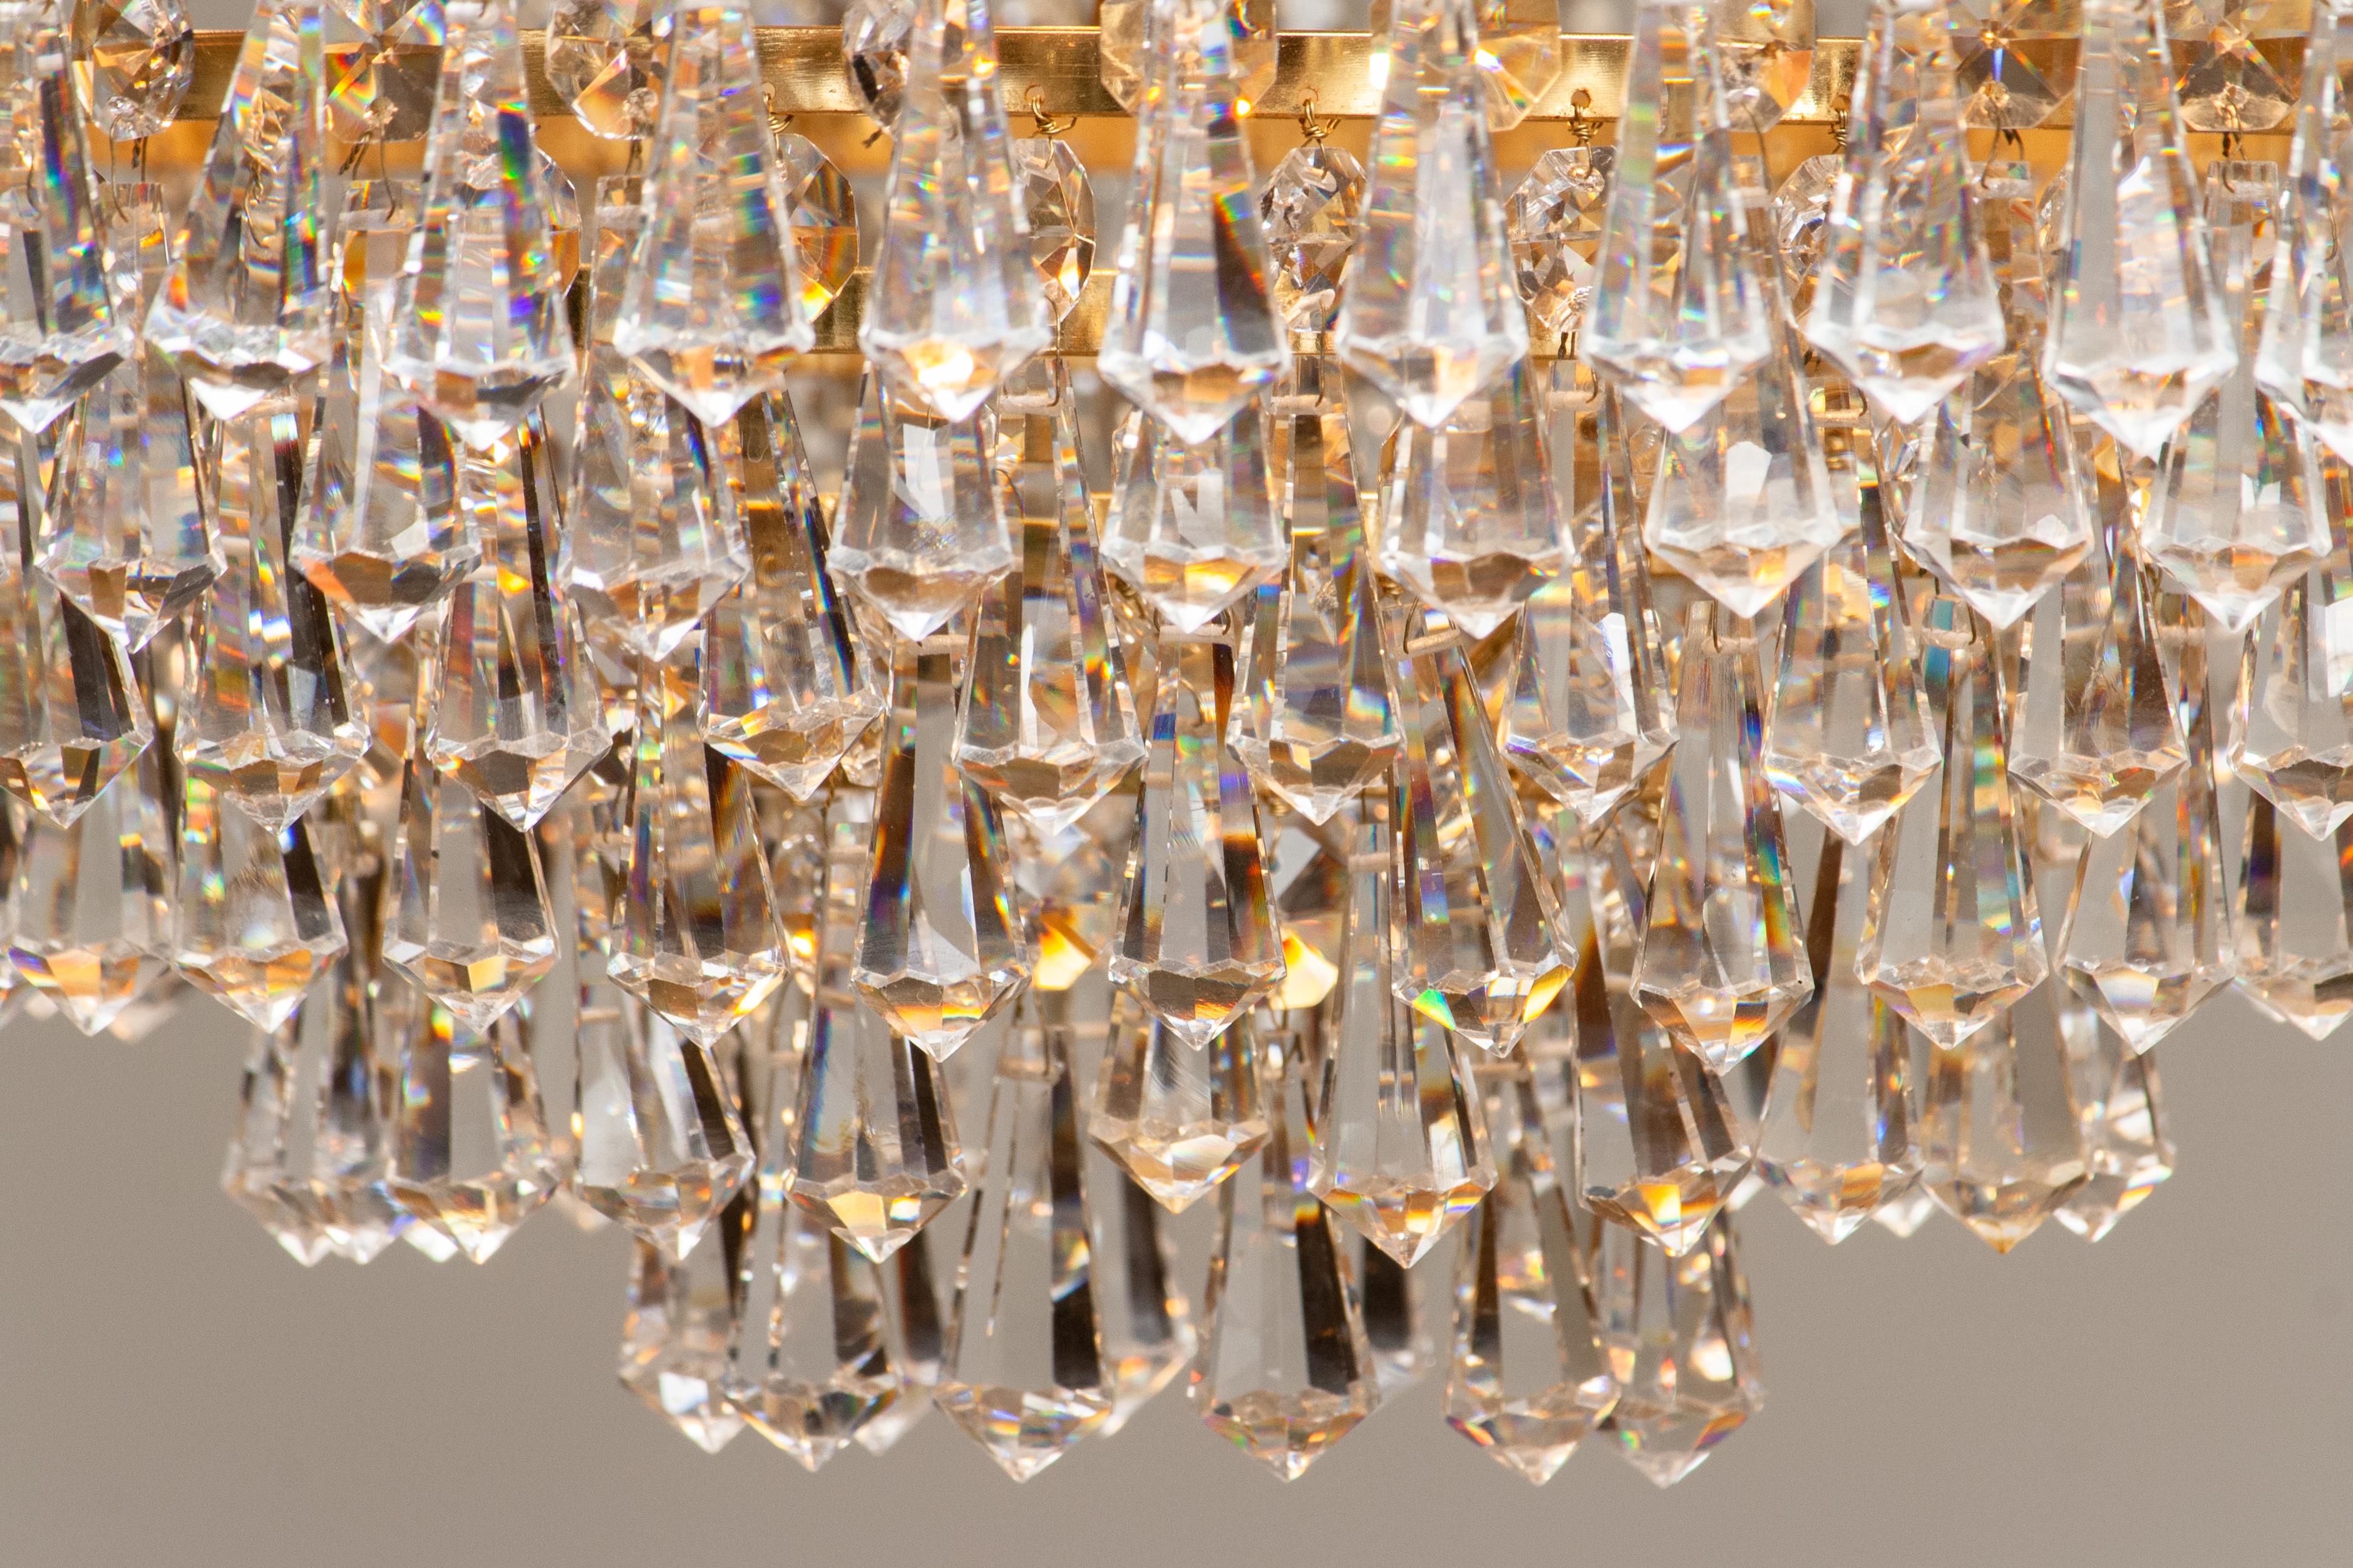 Beautiful gold-plated chandelier attributed to Rejmyre Armaturfabrik Rejmyre, Sweden, 1970s.
The chandelier is build up out of six rings and two crowns filled with faceted crystal, total diameter of the fixture is 44cm or 17